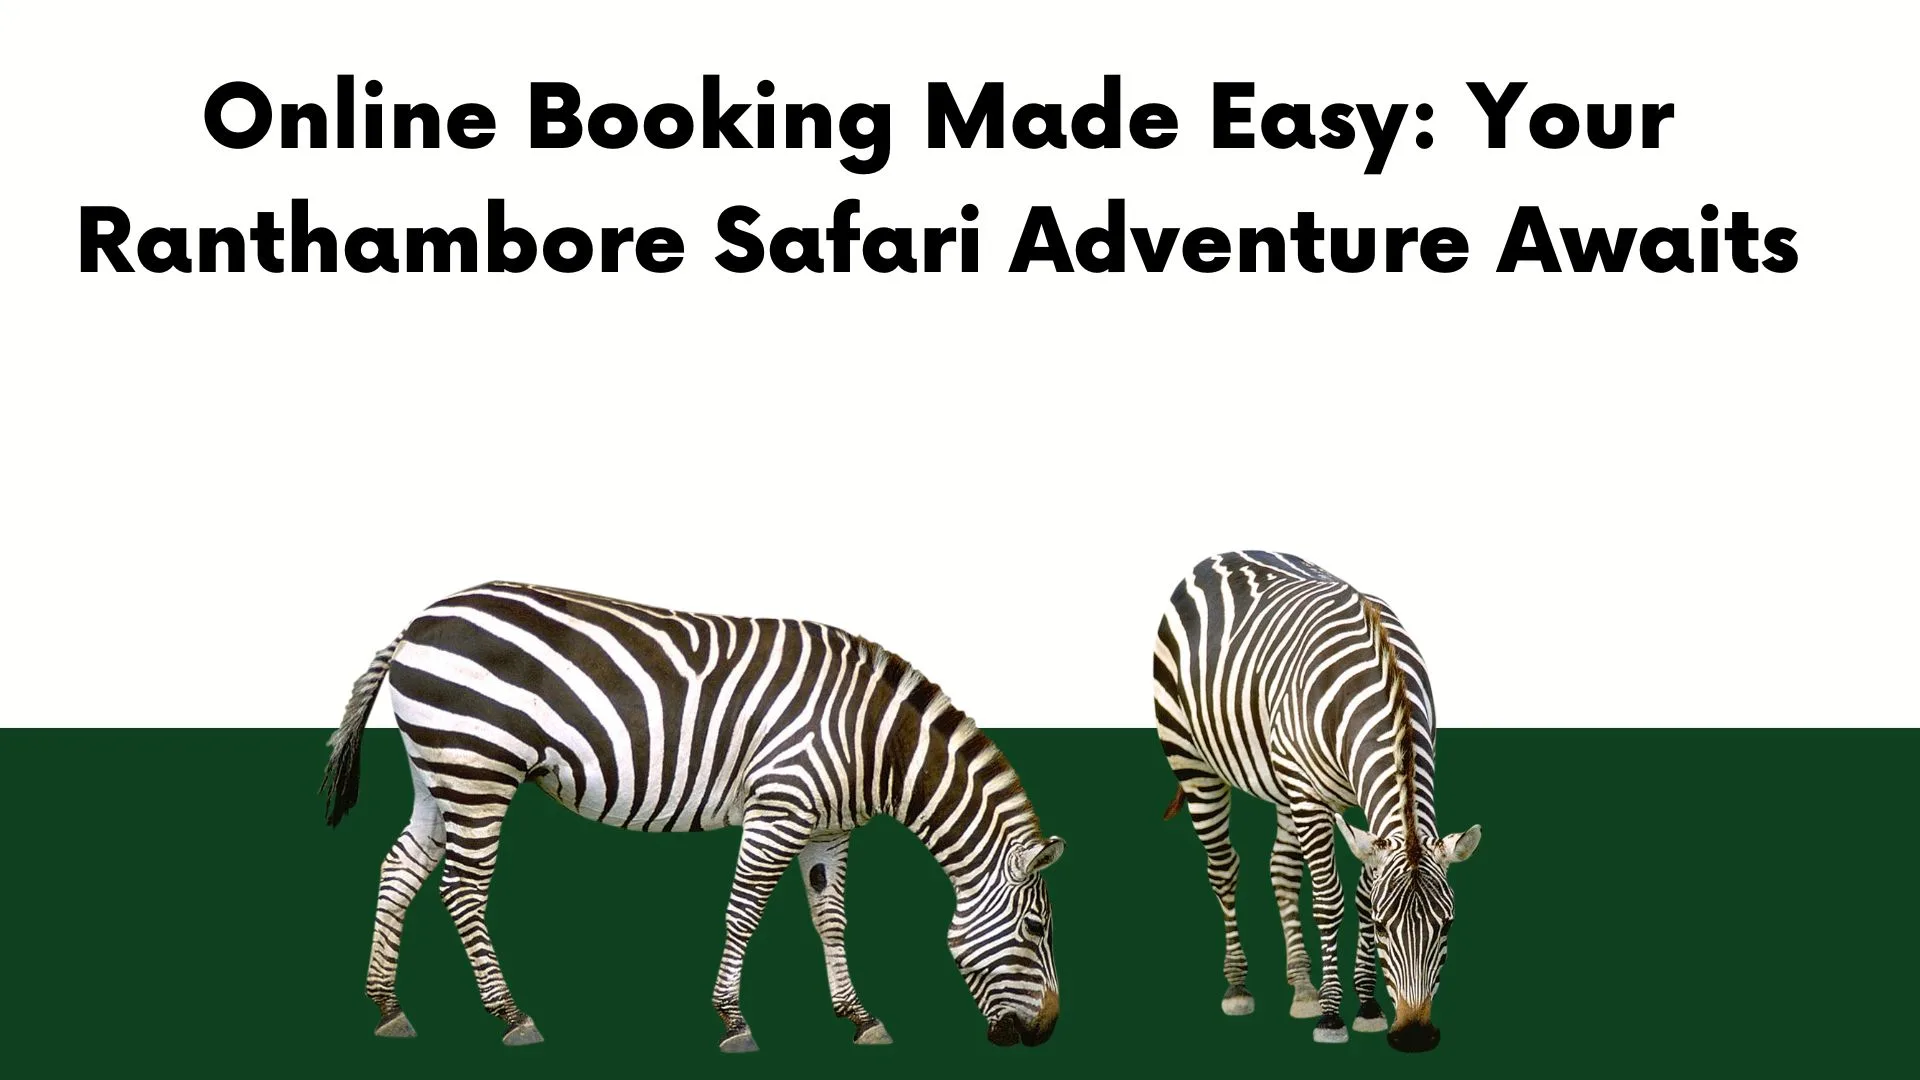 Online Booking Made Easy: Your Ranthambore Safari Adventure Awaits